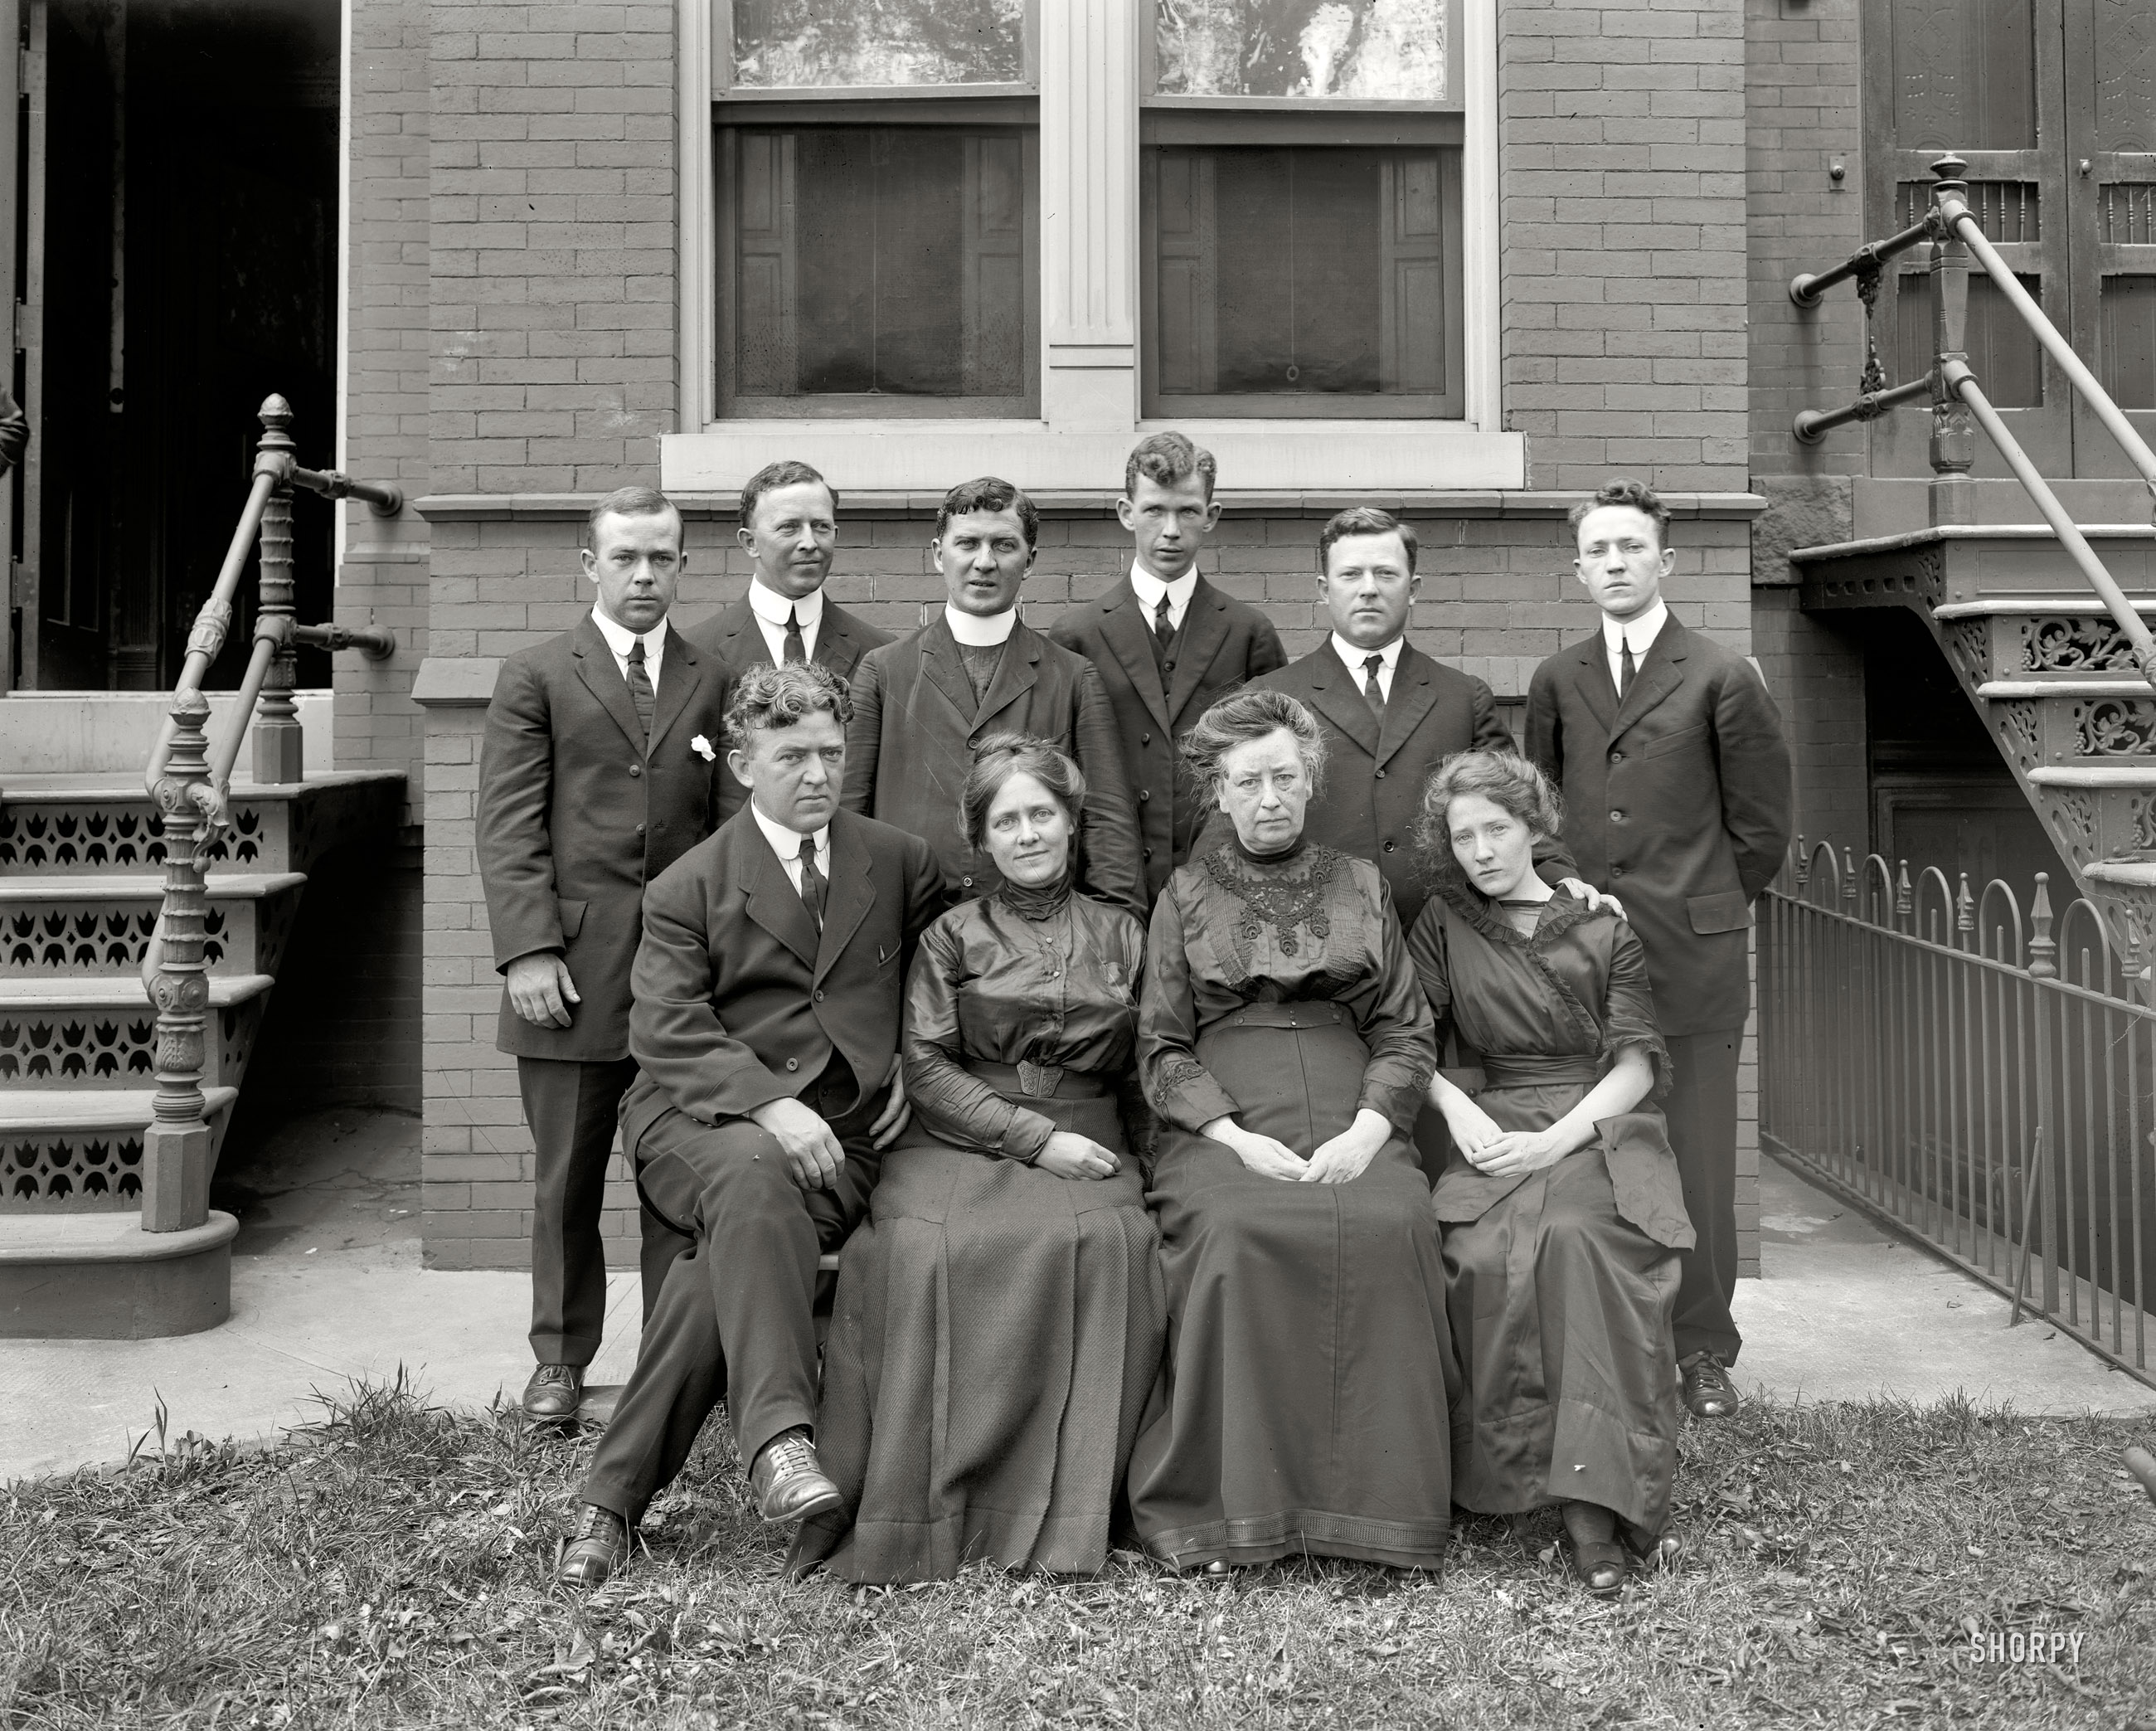 Washington, D.C., circa 1920. "Father Fealey and family." Ignatius Fealey, post chaplain at Fort Myer and future pastor of St. Agnes Catholic Church. National Photo Company Collection glass negative. View full size.